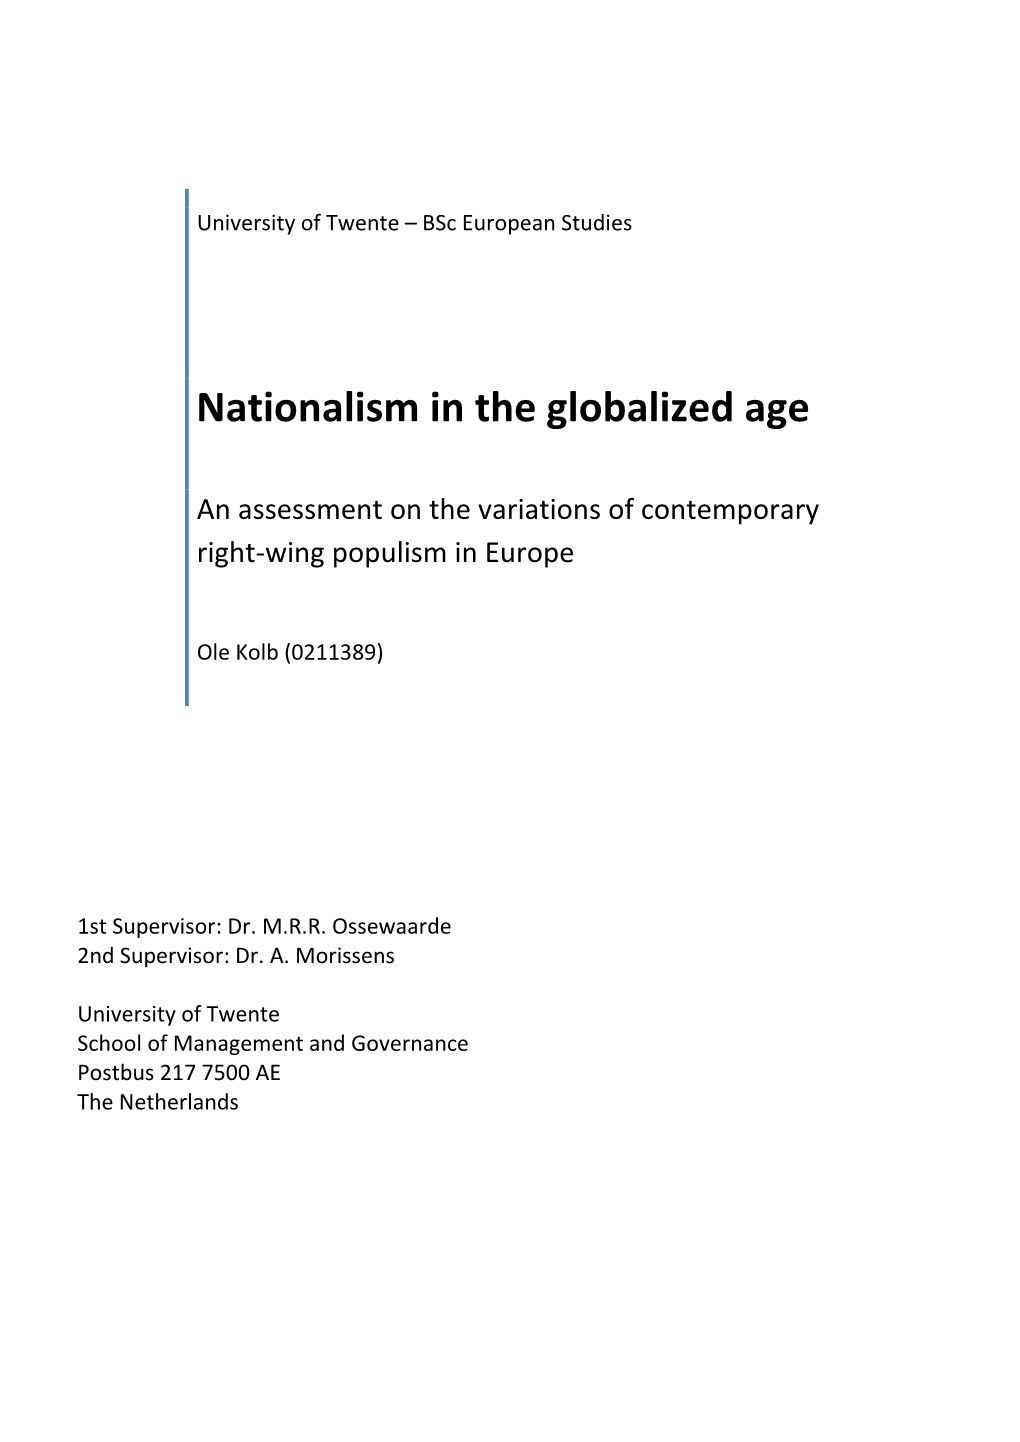 Nationalism in the Globalized Age